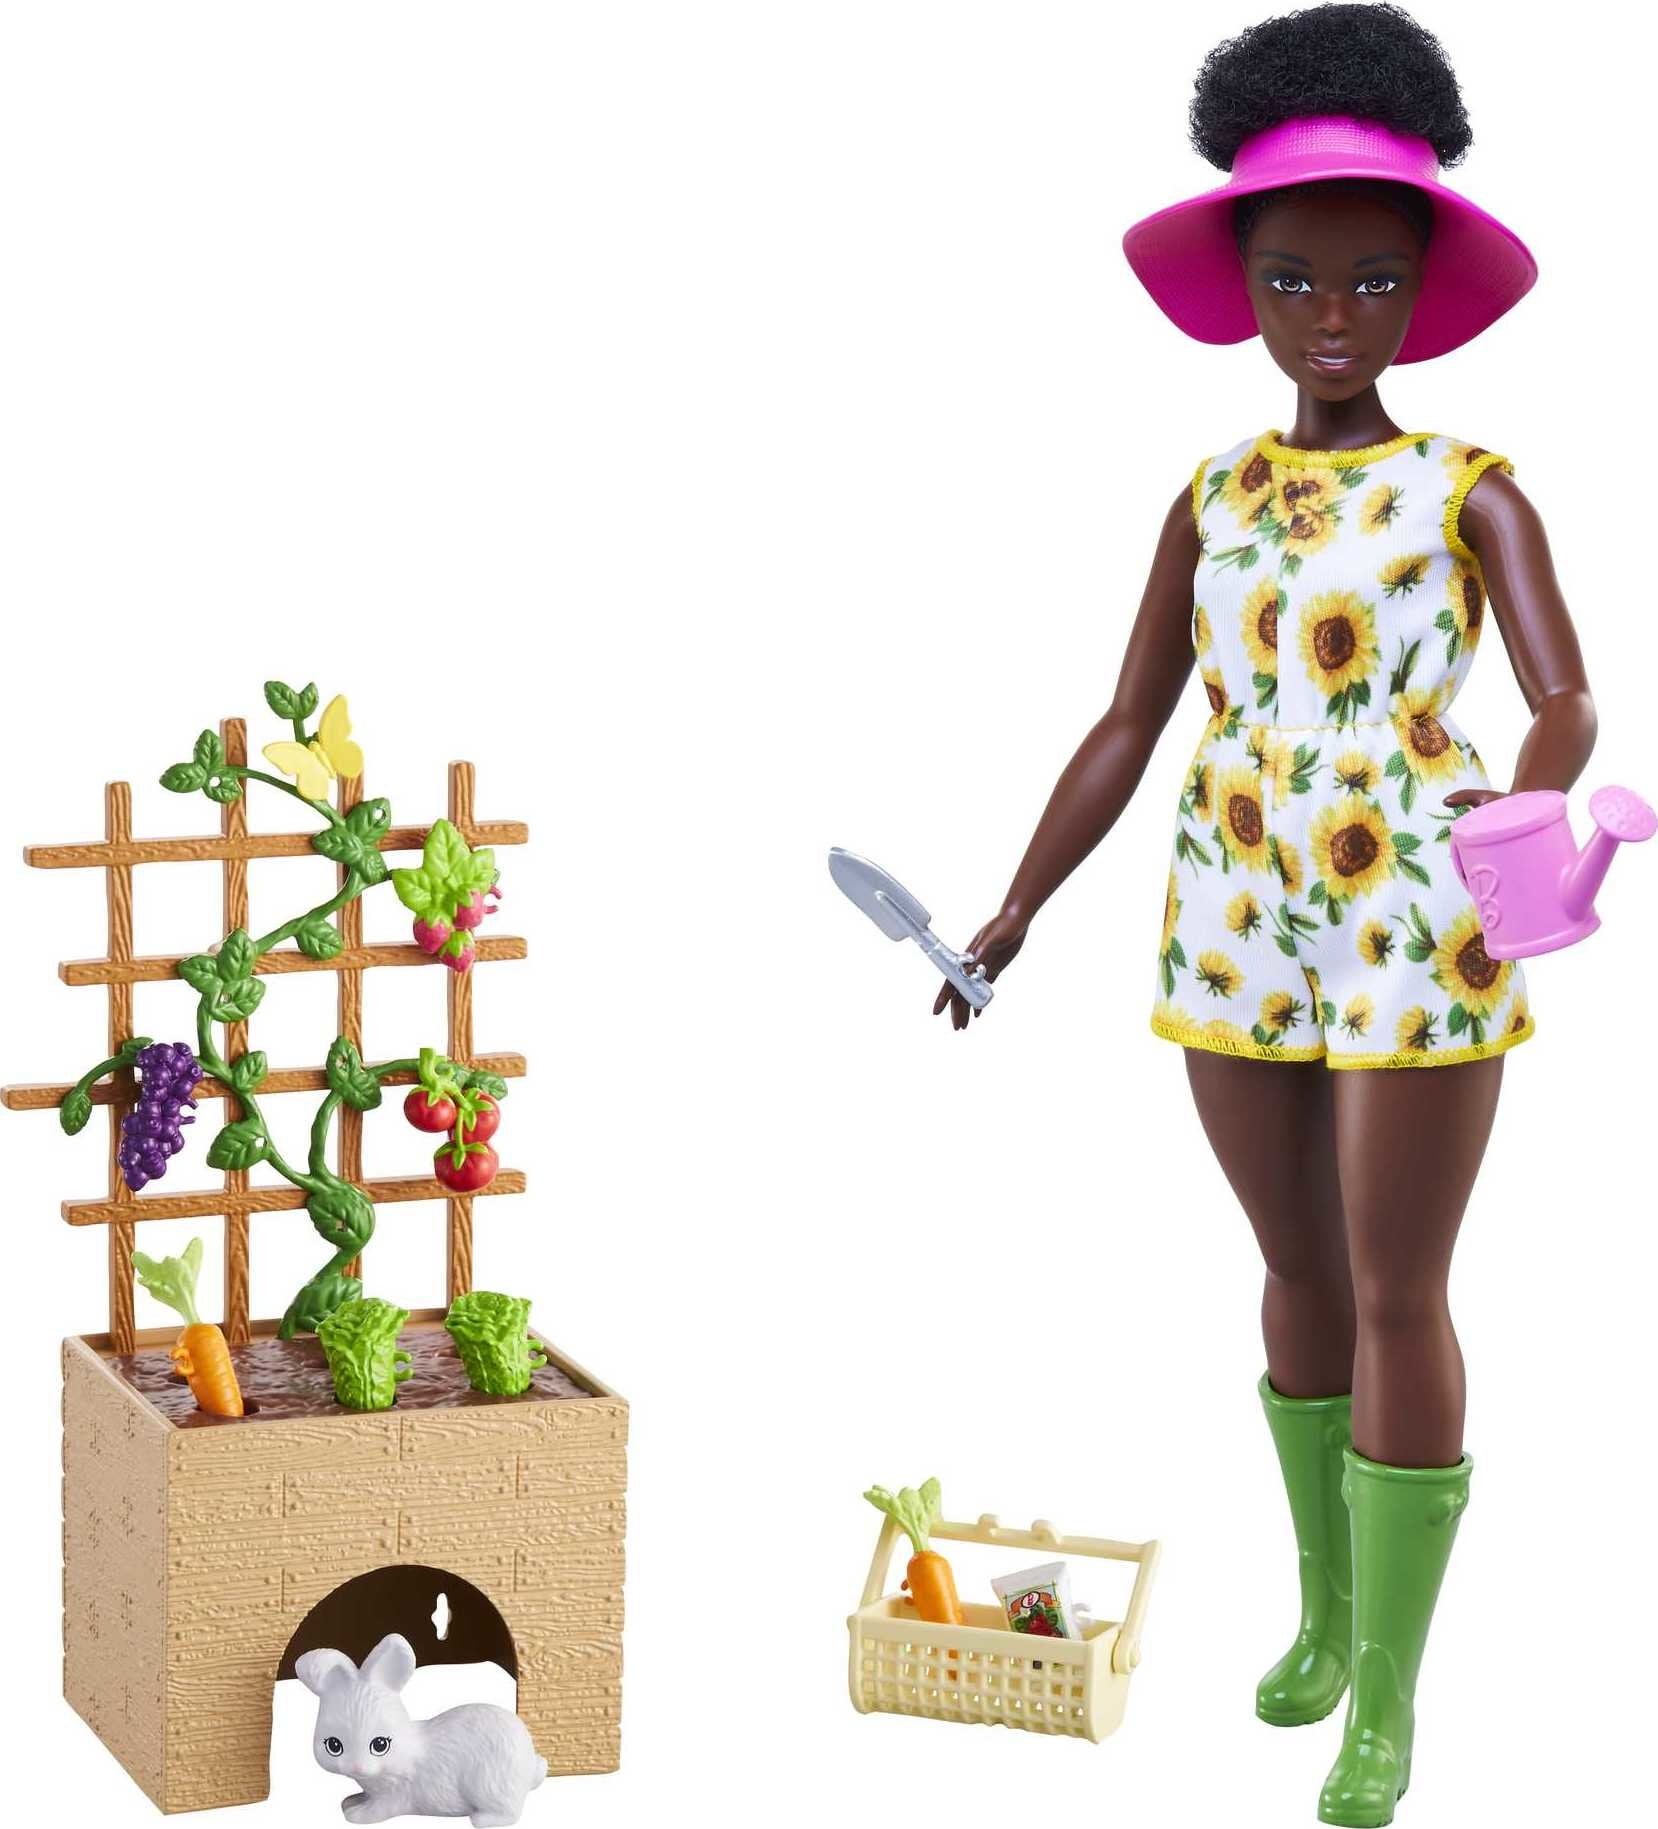 Barbie Career Playsets Featuring Job Themes and Related Accessories for  Kids Learning Fun Aged 3 to 7 Years Old